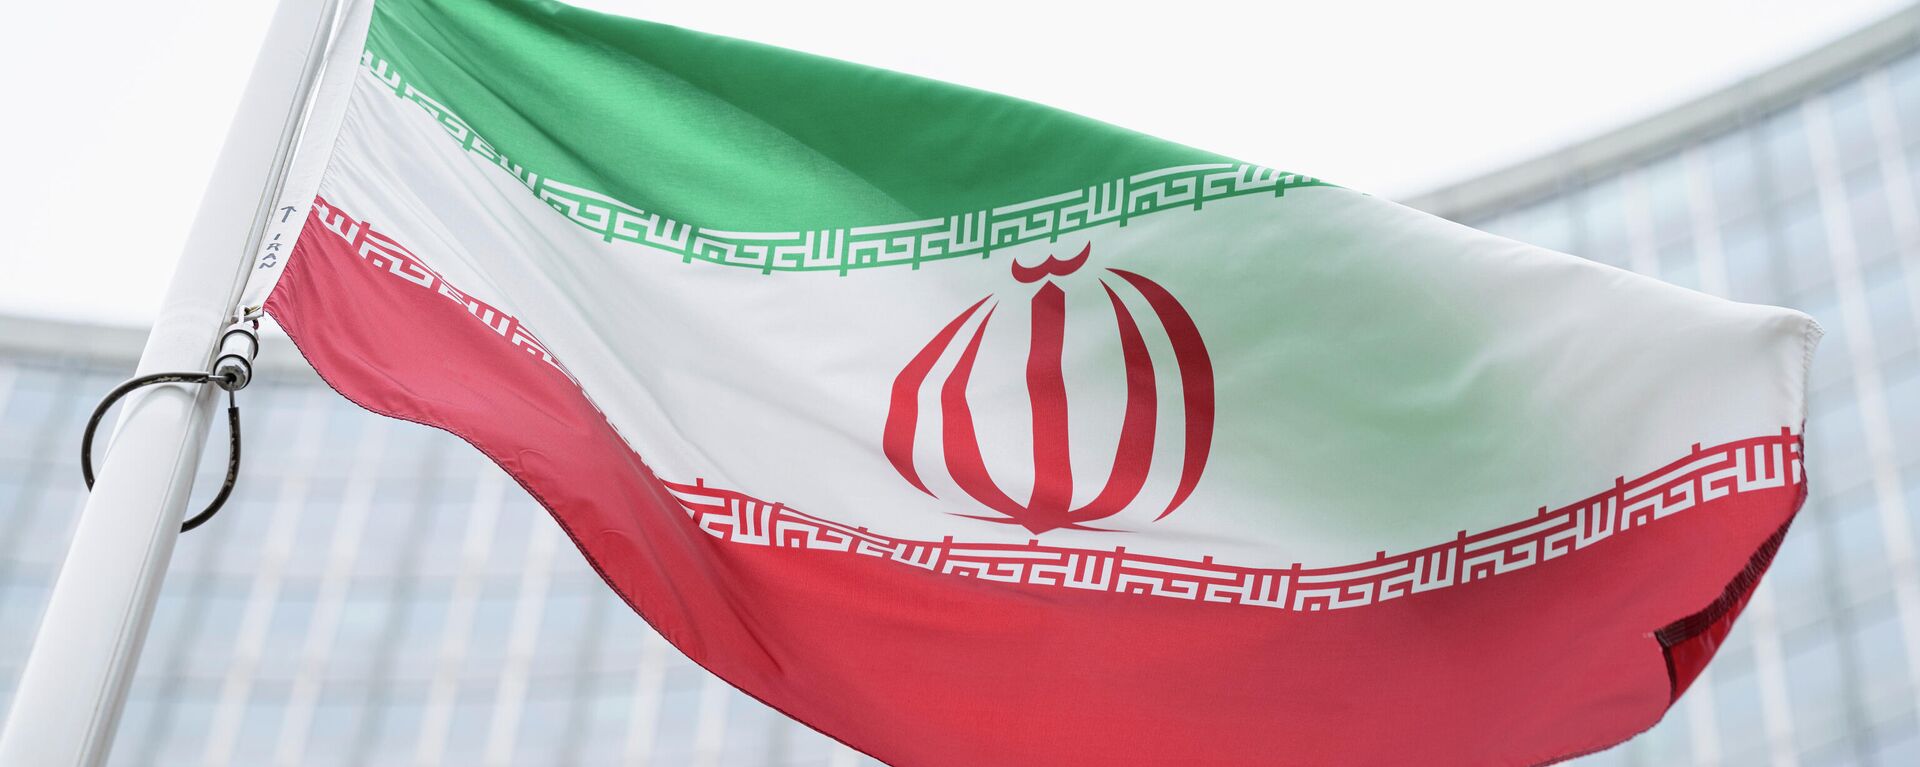 FILE - The flag of Iran waves in front of the the International Center building with the headquarters of the International Atomic Energy Agency, IAEA, in Vienna, AustriaI, May 24, 2021. On Monday, Nov. 29, 2021, negotiators are gathering in Vienna to resume efforts to revive Iran's 2015 nuclear deal with world powers, with hopes of quick progress muted after the arrival of a hard-line new government in Tehran led to a more than five-month hiatus. (AP Photo/Florian Schroetter, FILE) - Sputnik International, 1920, 28.10.2022